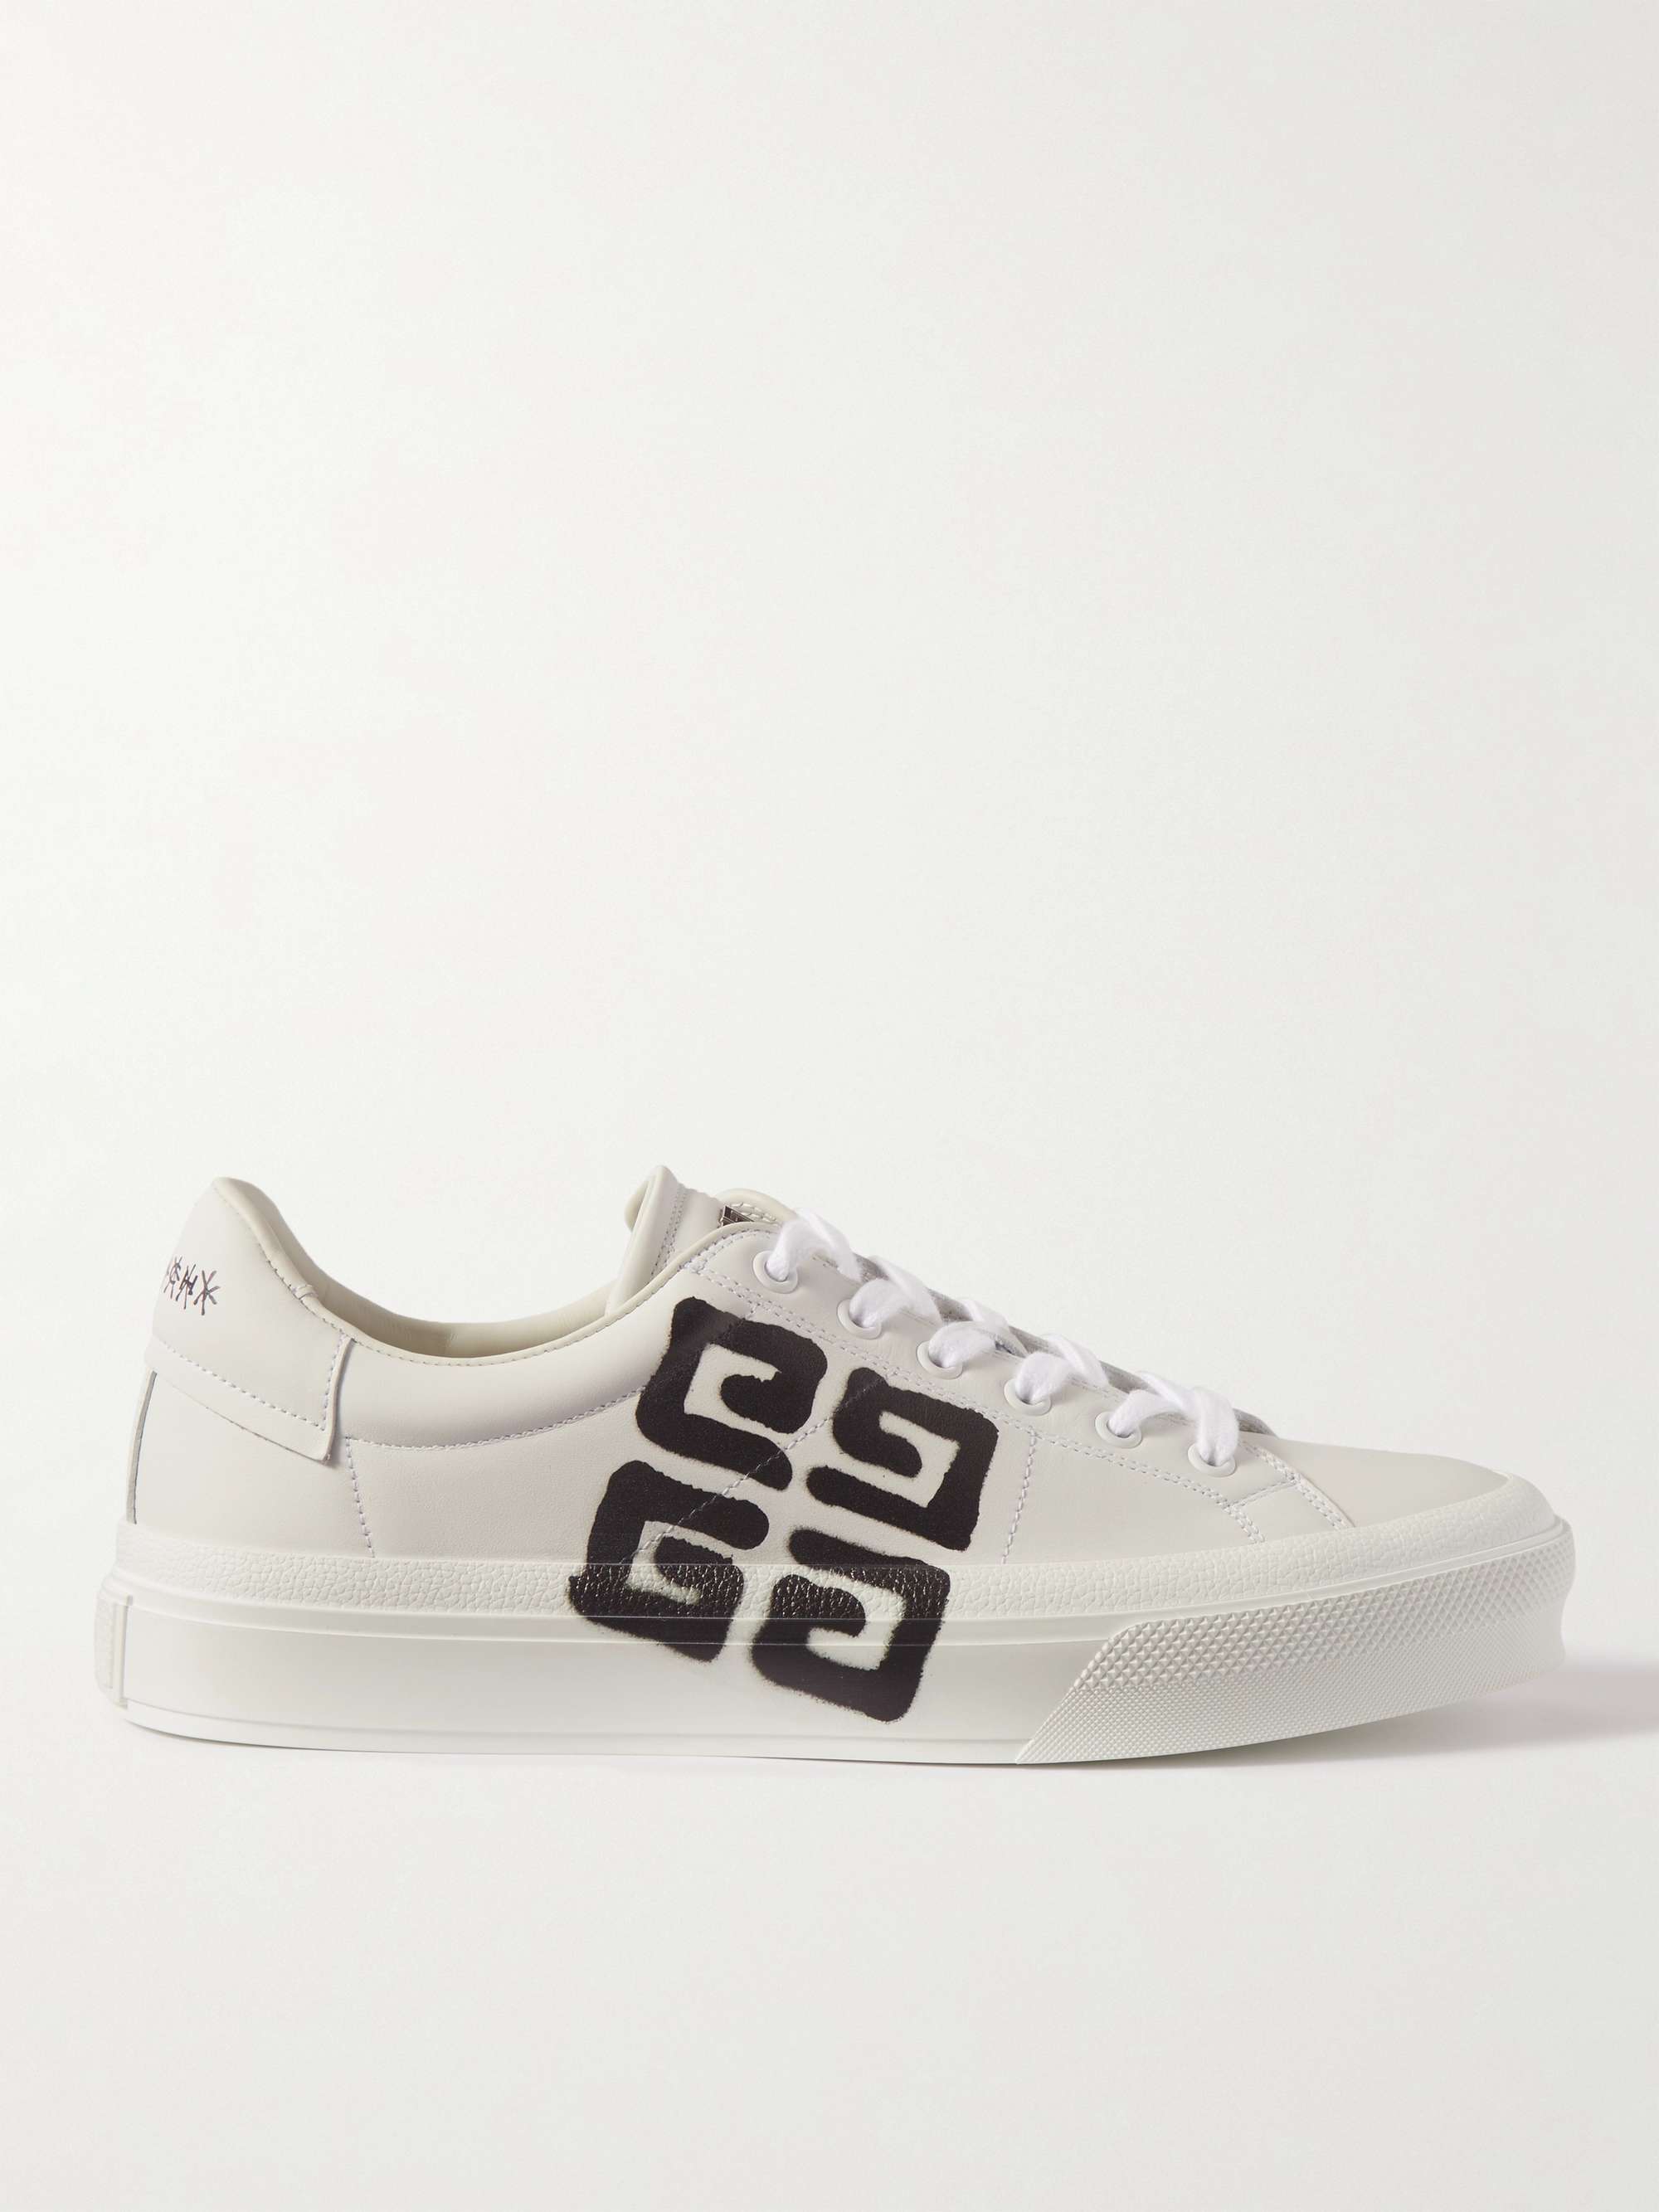 + Chito City Sport Logo-Print Leather Sneakers